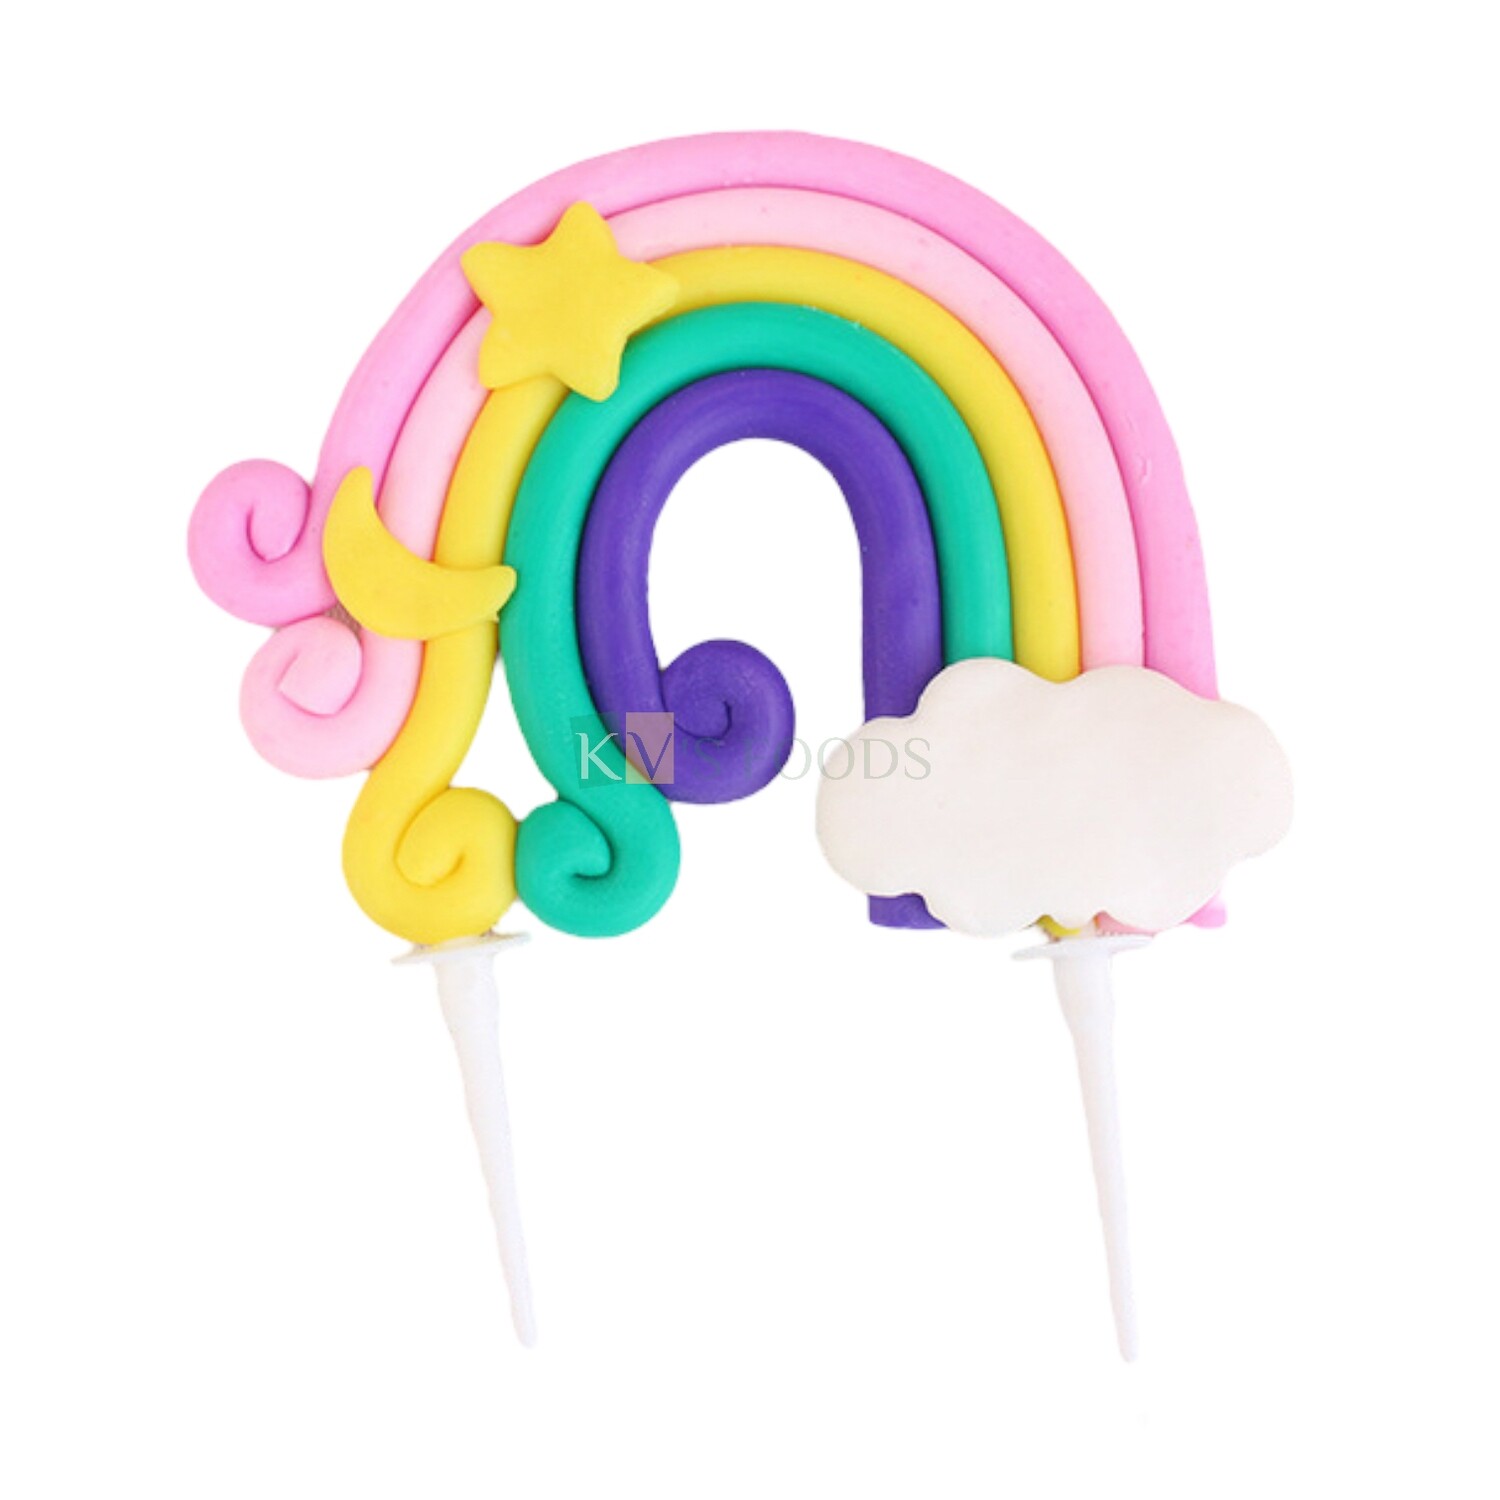 1pc Rainbow with Curl Moon Star Cloud Cake Topper for Unicorn Baby shower Themes, Fondant alike, Cake Topper Insert, Girls, Boys, Friends Bday, Cake Decoration Item, Cake Accessories, DIY Cake Decor